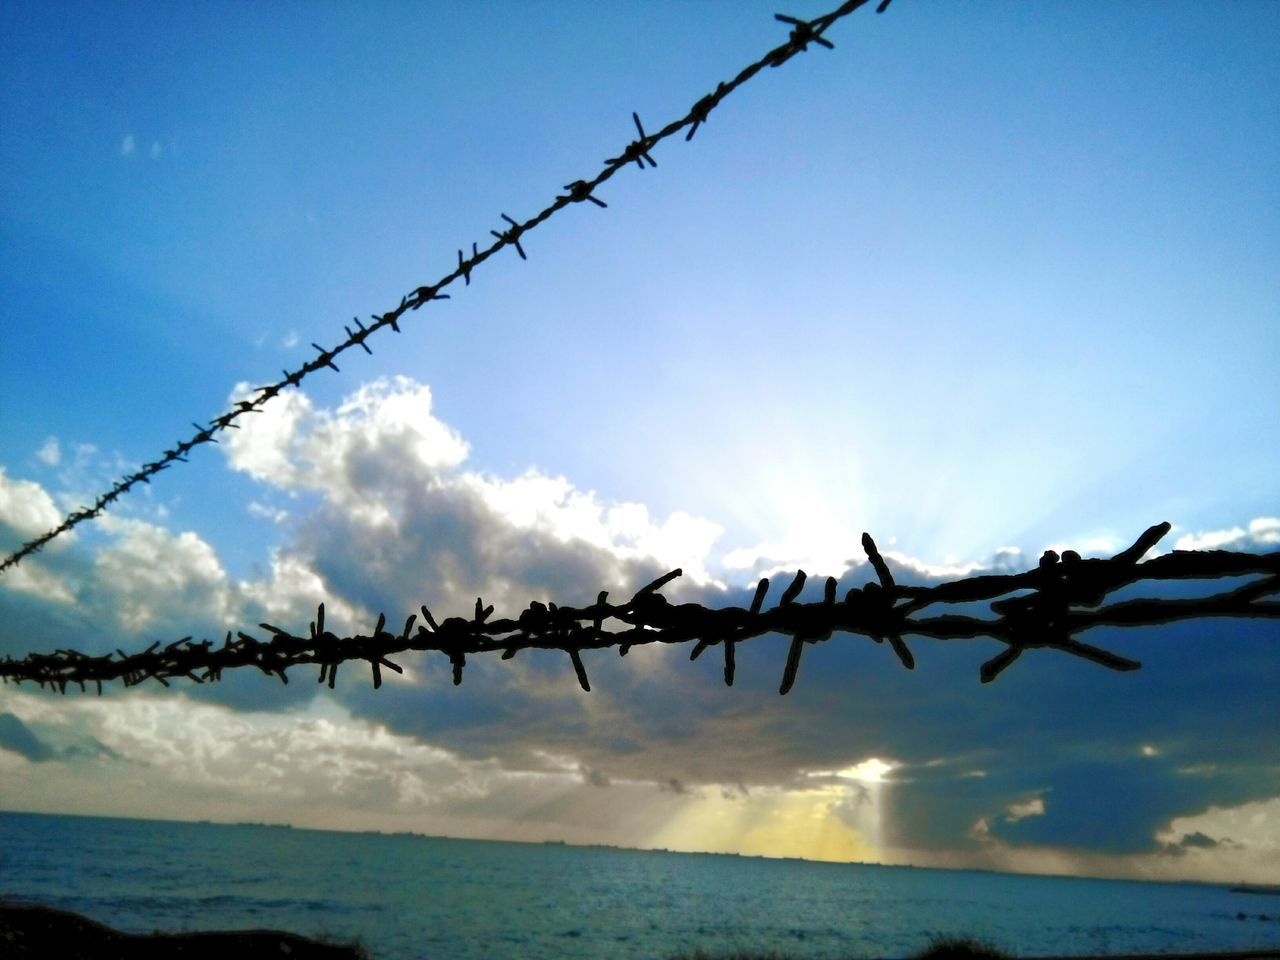 sea, water, horizon over water, sky, beach, protection, safety, tranquility, nature, in a row, tranquil scene, shore, blue, scenics, security, fence, sunset, beauty in nature, outdoors, flock of birds